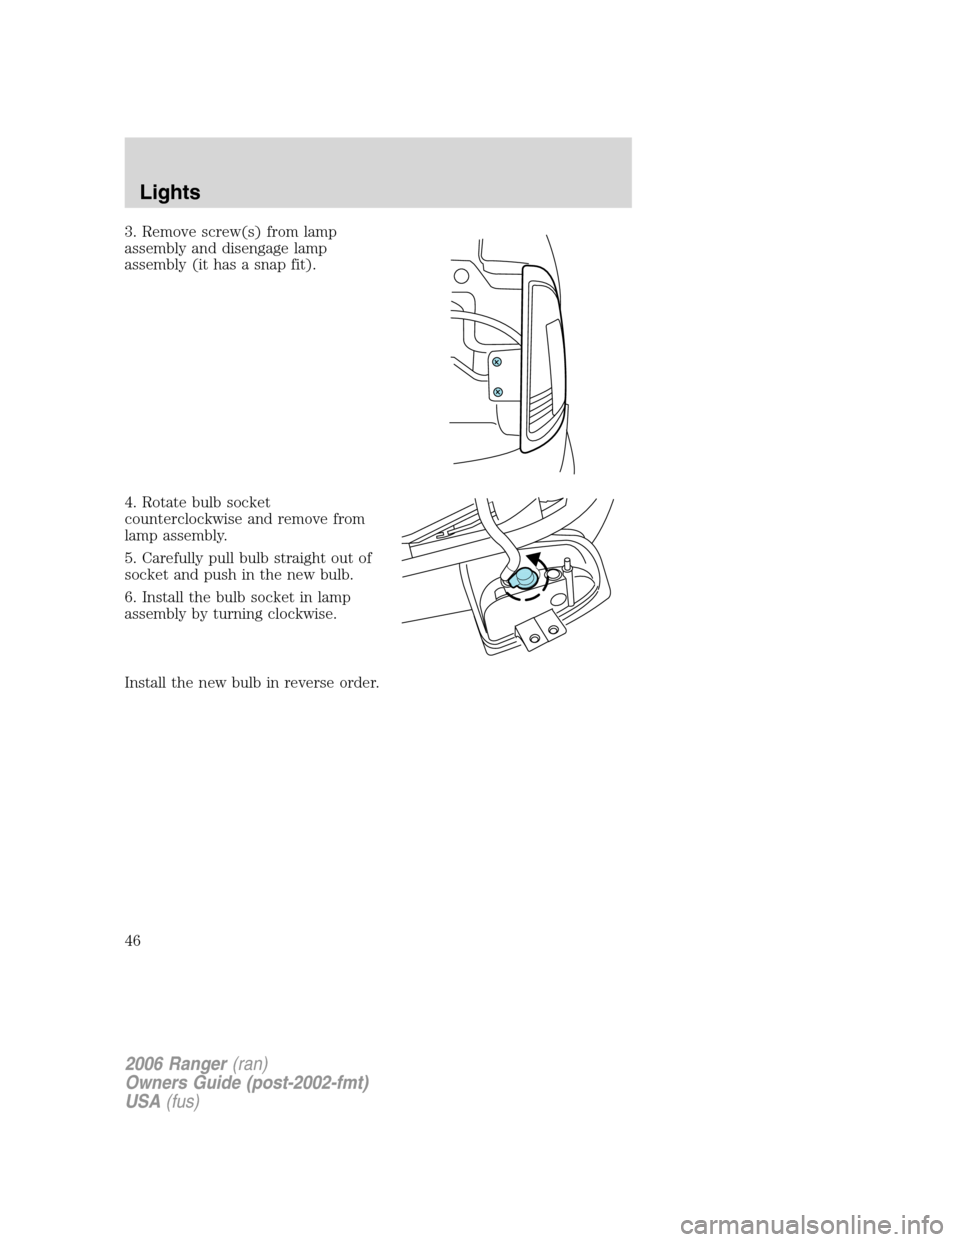 FORD RANGER 2006 2.G Owners Manual 3. Remove screw(s) from lamp
assembly and disengage lamp
assembly (it has a snap fit).
4. Rotate bulb socket
counterclockwise and remove from
lamp assembly.
5. Carefully pull bulb straight out of
sock